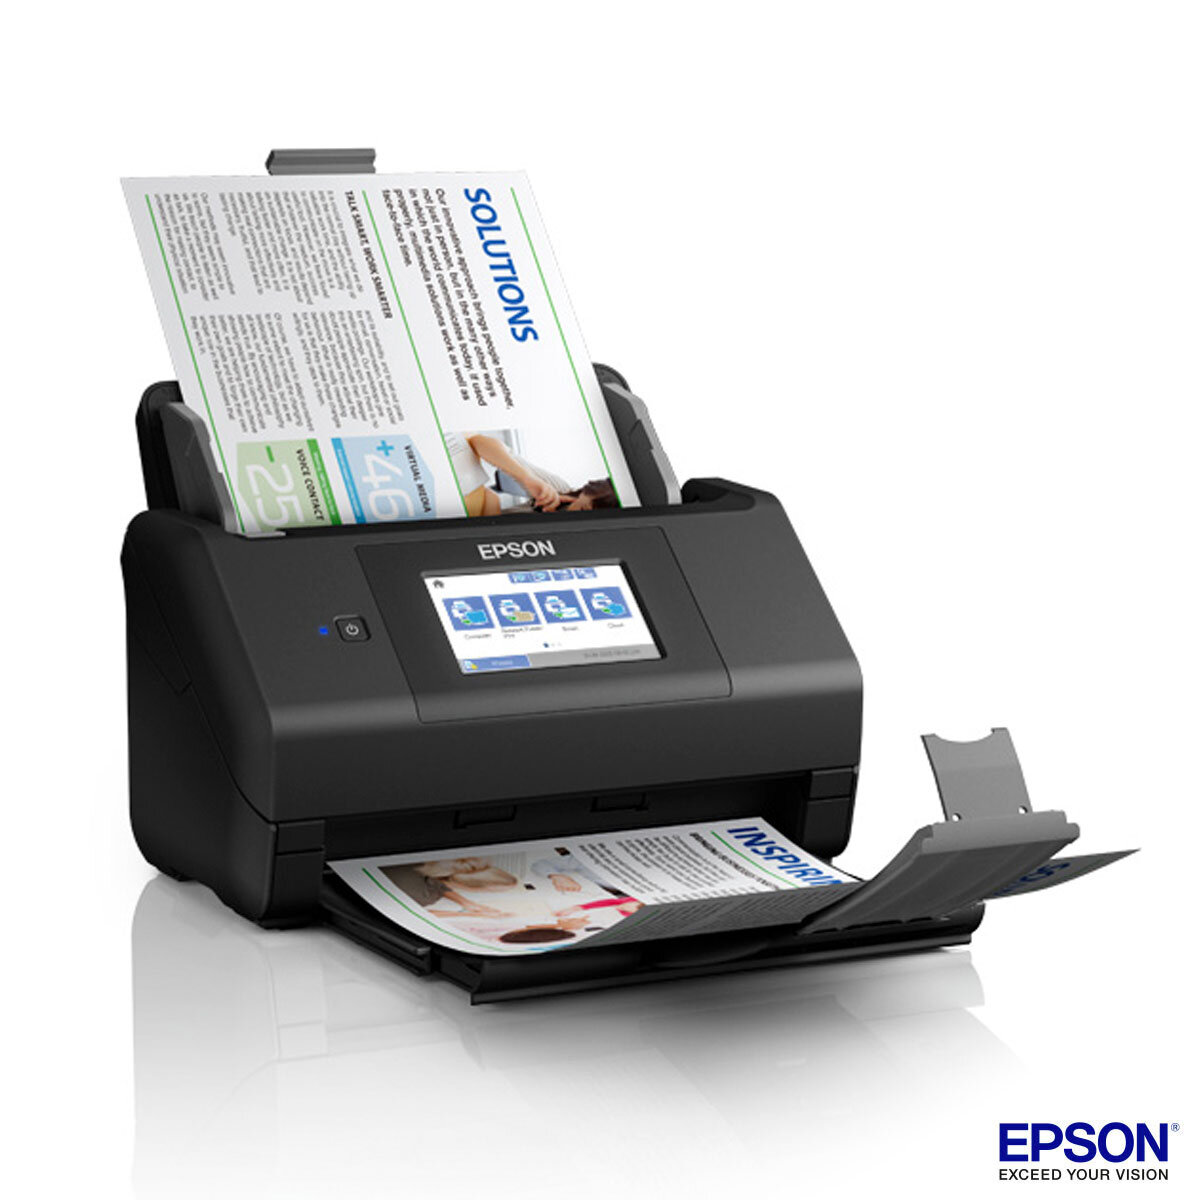 Buy Epson WorkForce ES-580W Scanner Overview Image at Costco.co.uk